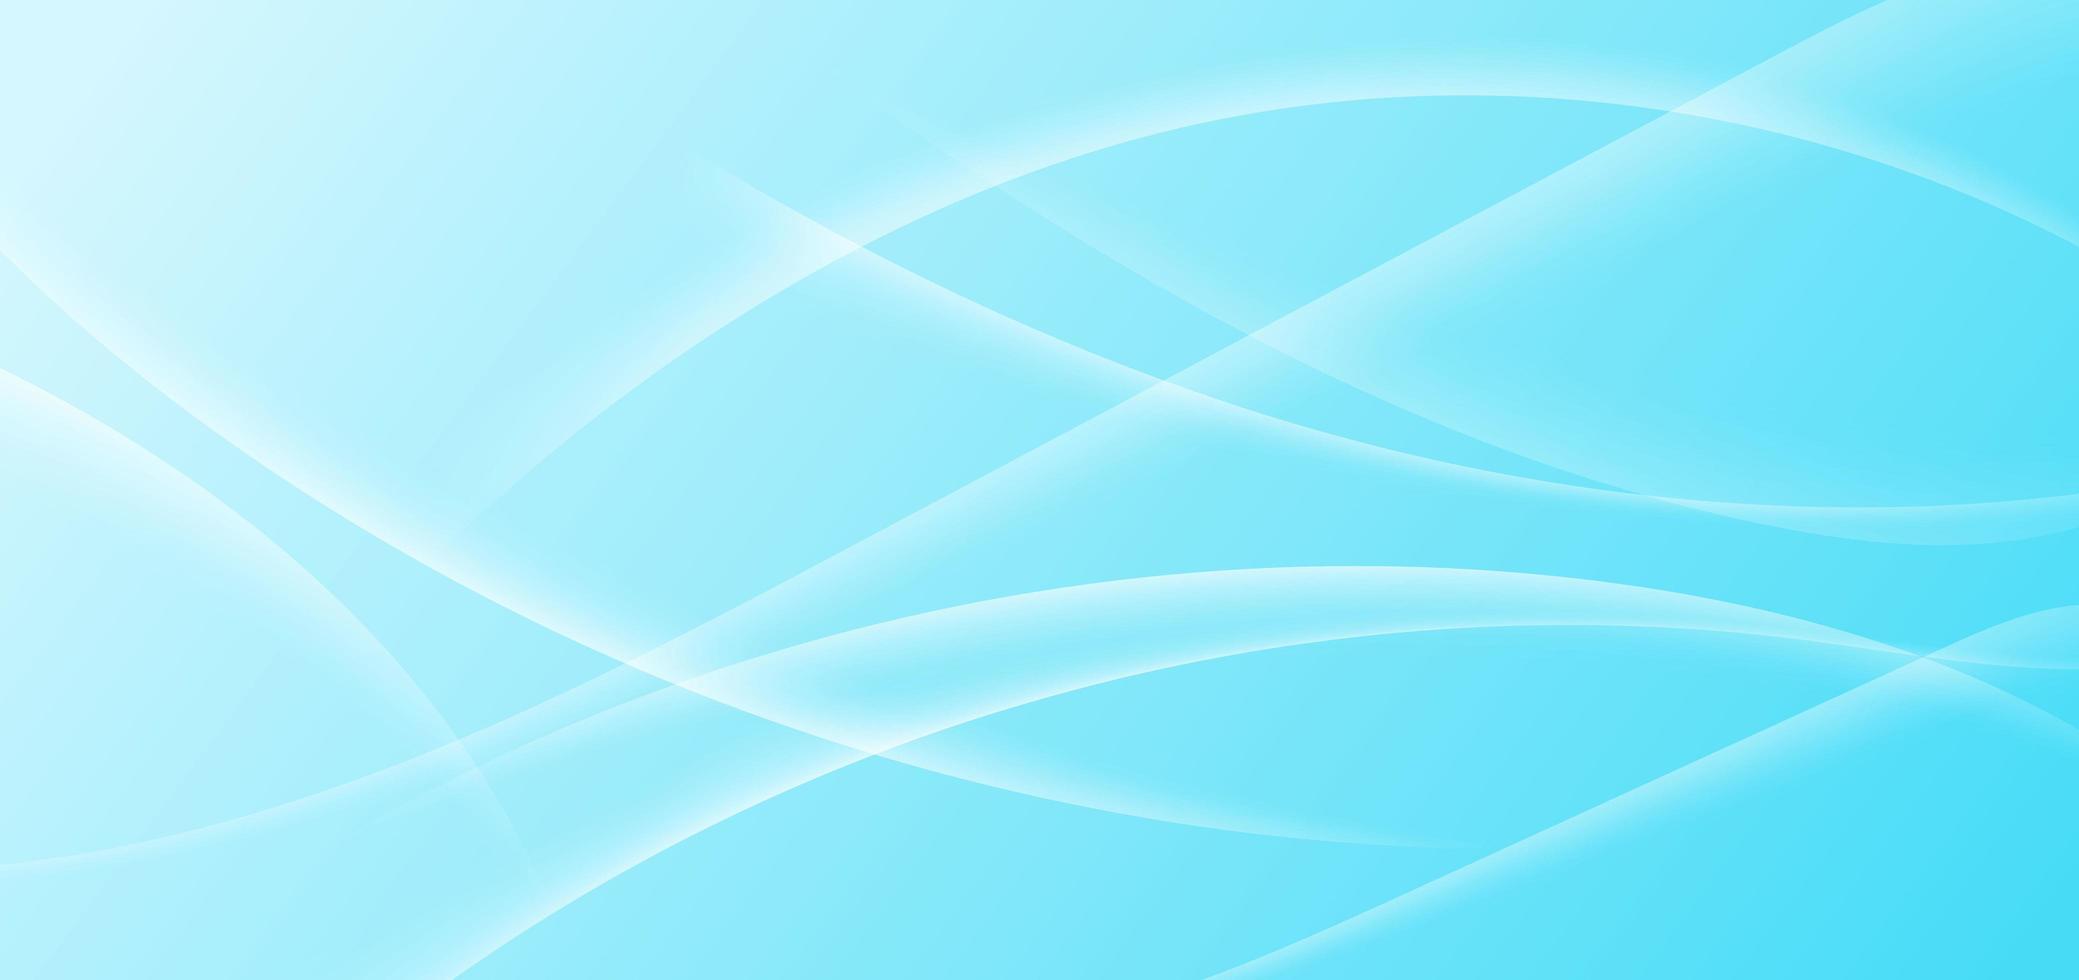 Abstract soft blue background with dynamic waves shape. vector